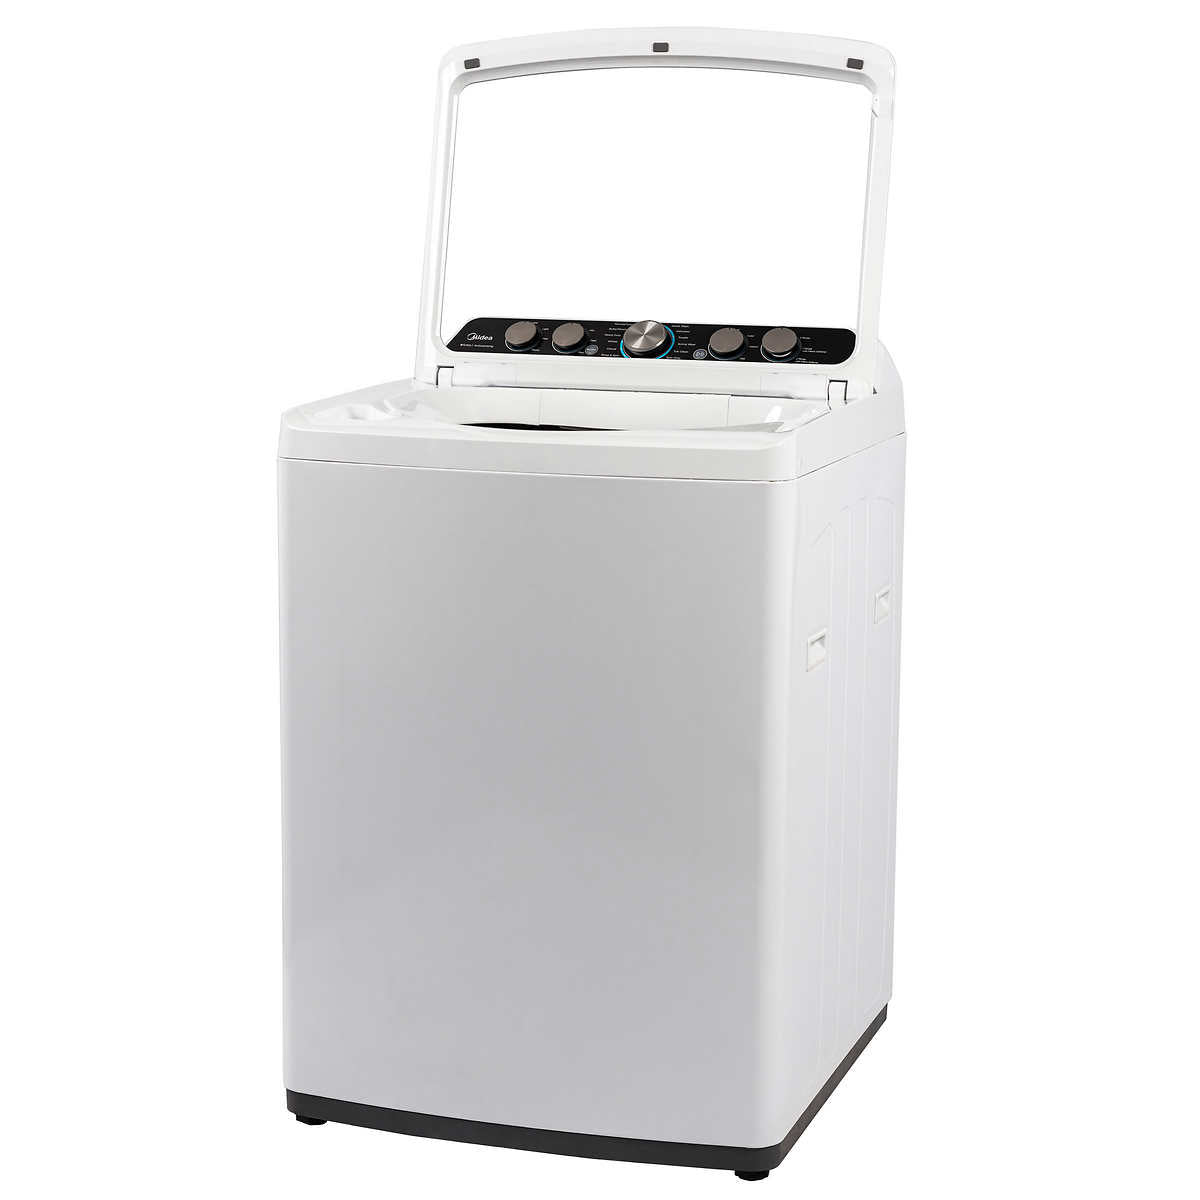 Midea 27 in. Top Load Laundry Suite with 4.7 cu. ft. Washer and 6.7 cu. ft. Dryer